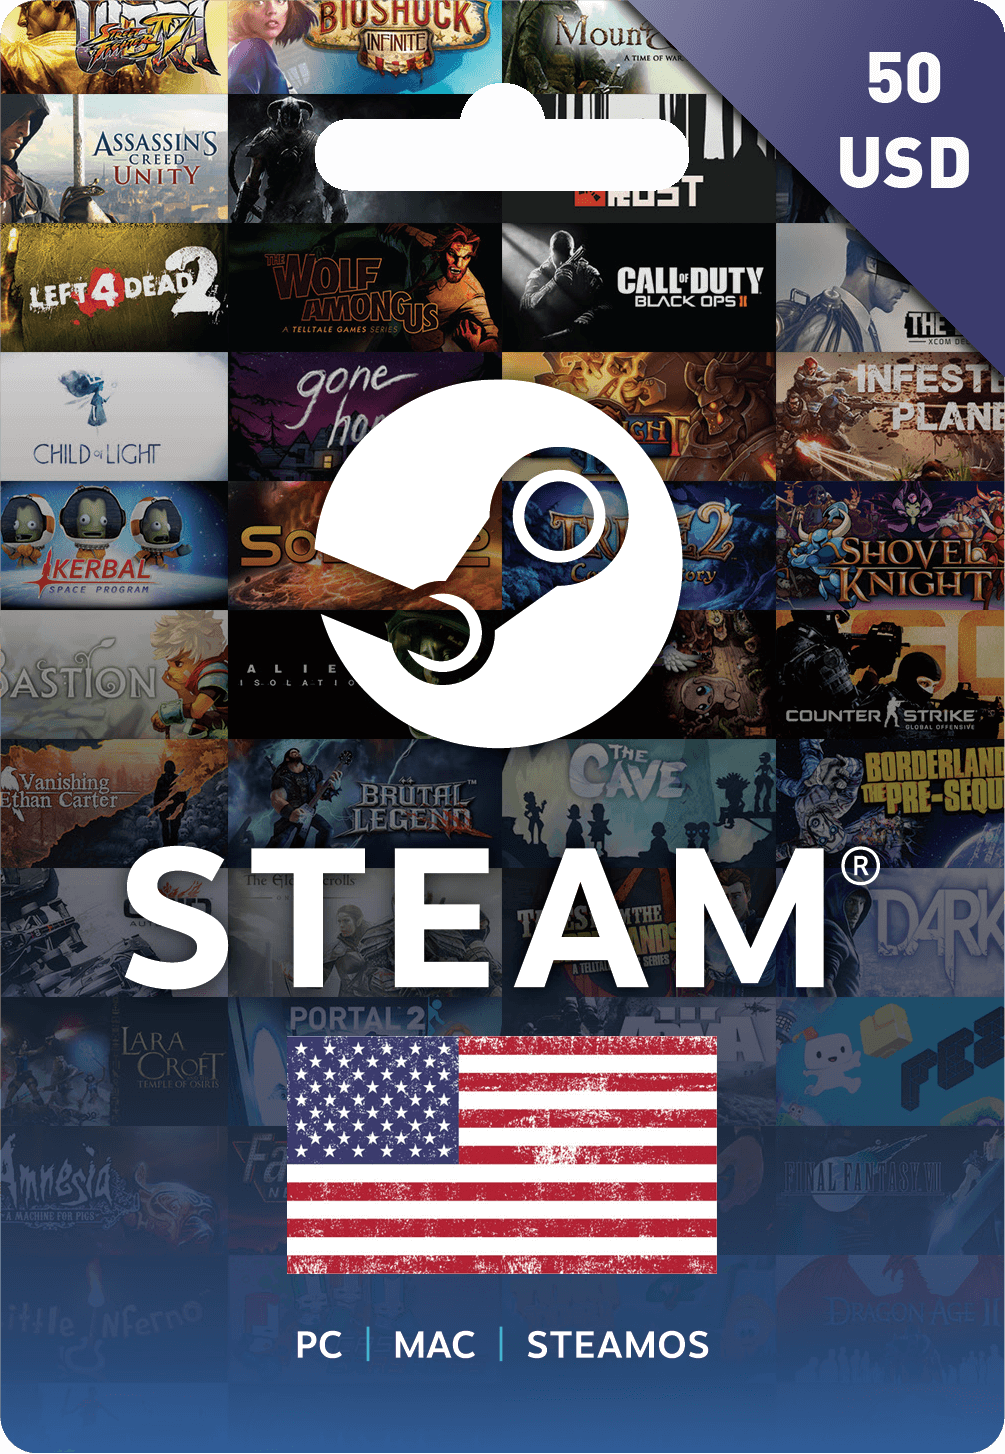 Buy Steam Wallet Codes 50 USD Now IaM A Live Store